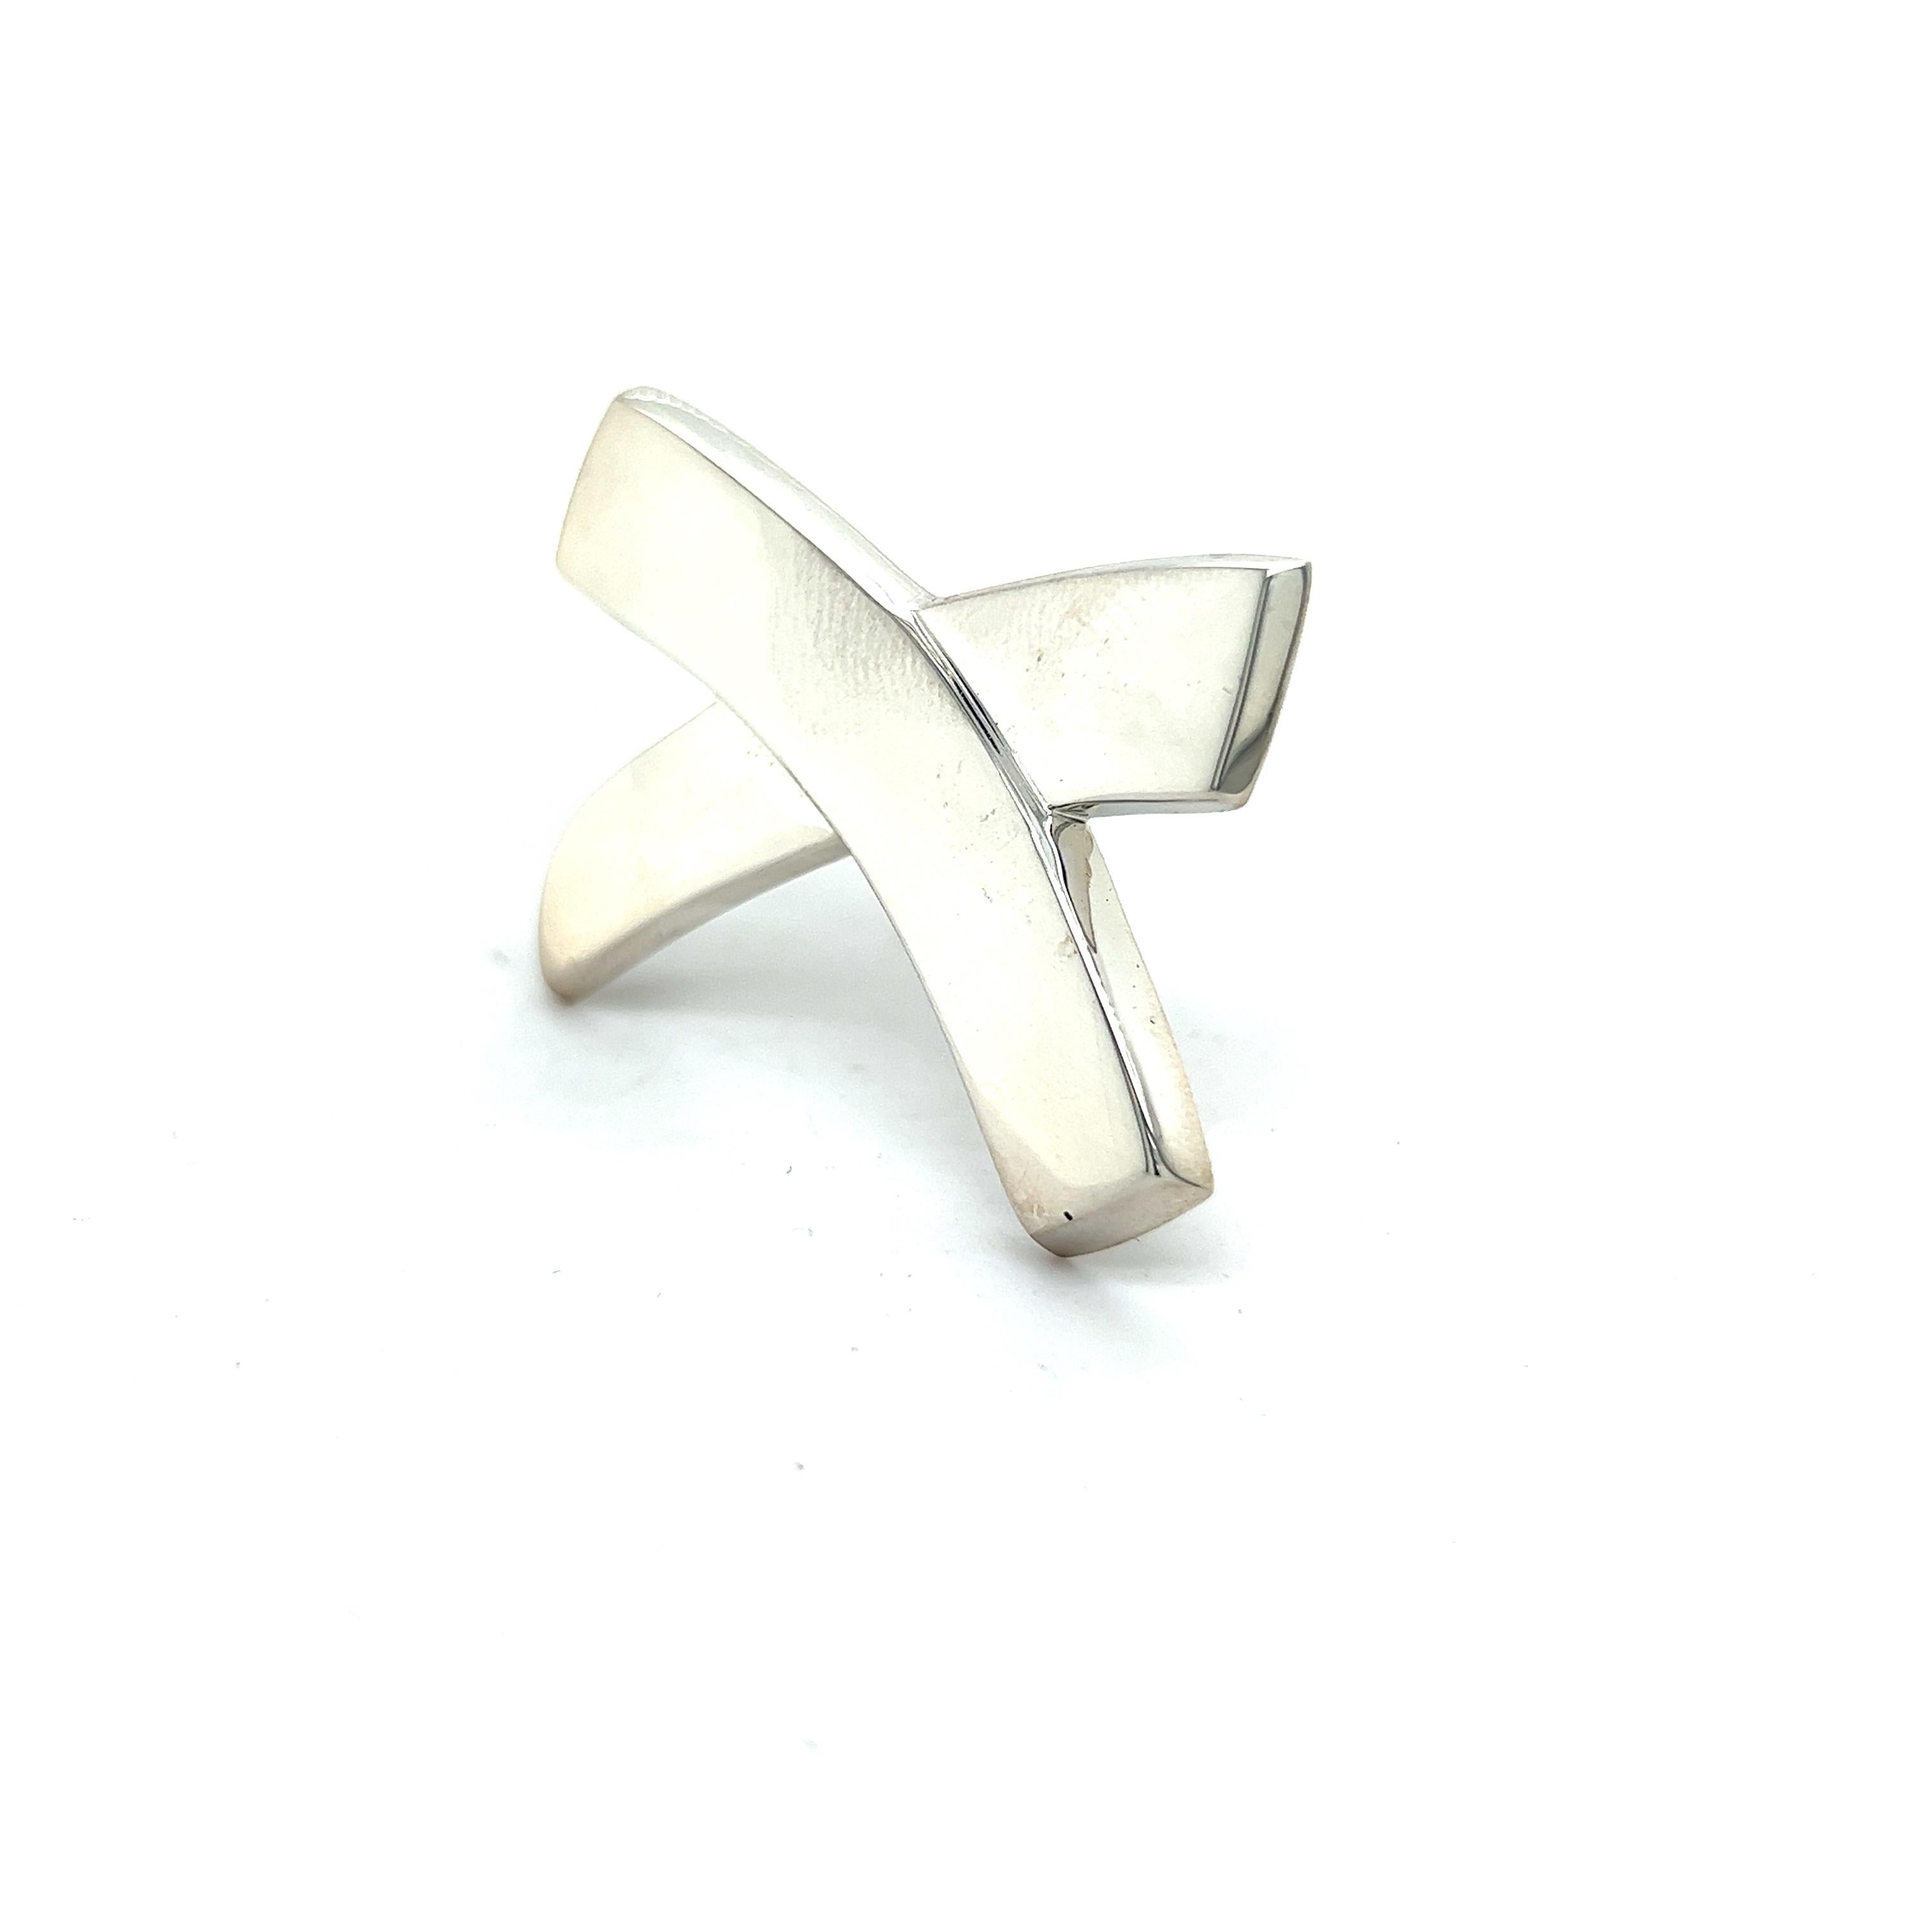 Tiffany & Co. Estate Large X Brooch Pin Silver by Paloma Picasso For Sale 3